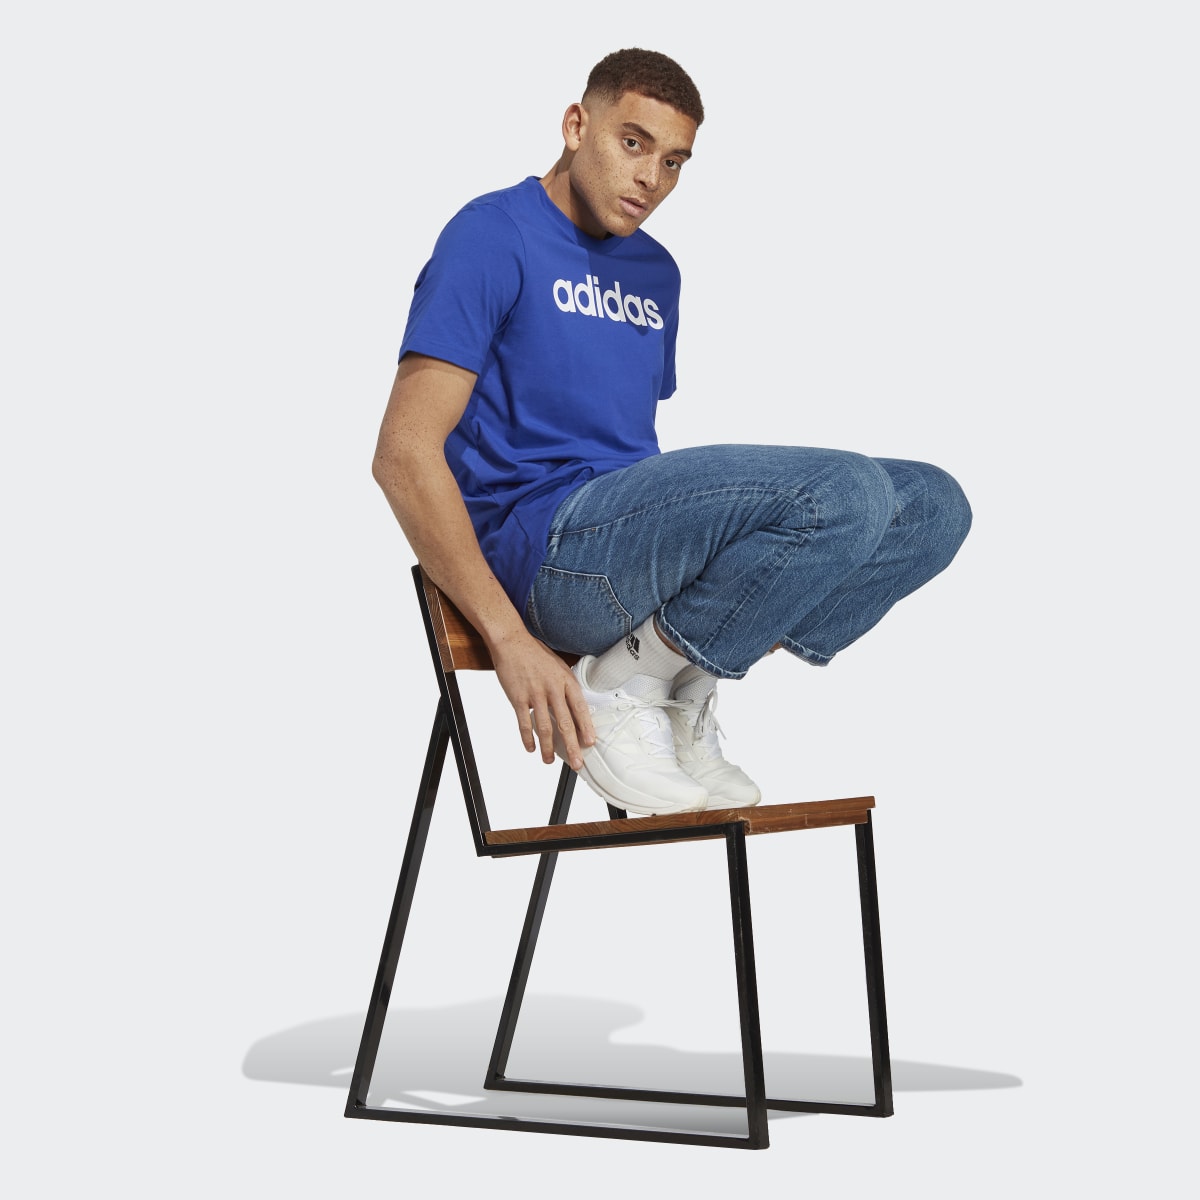 Adidas T-shirt Essentials Single Jersey Linear Embroidered Logo. 4